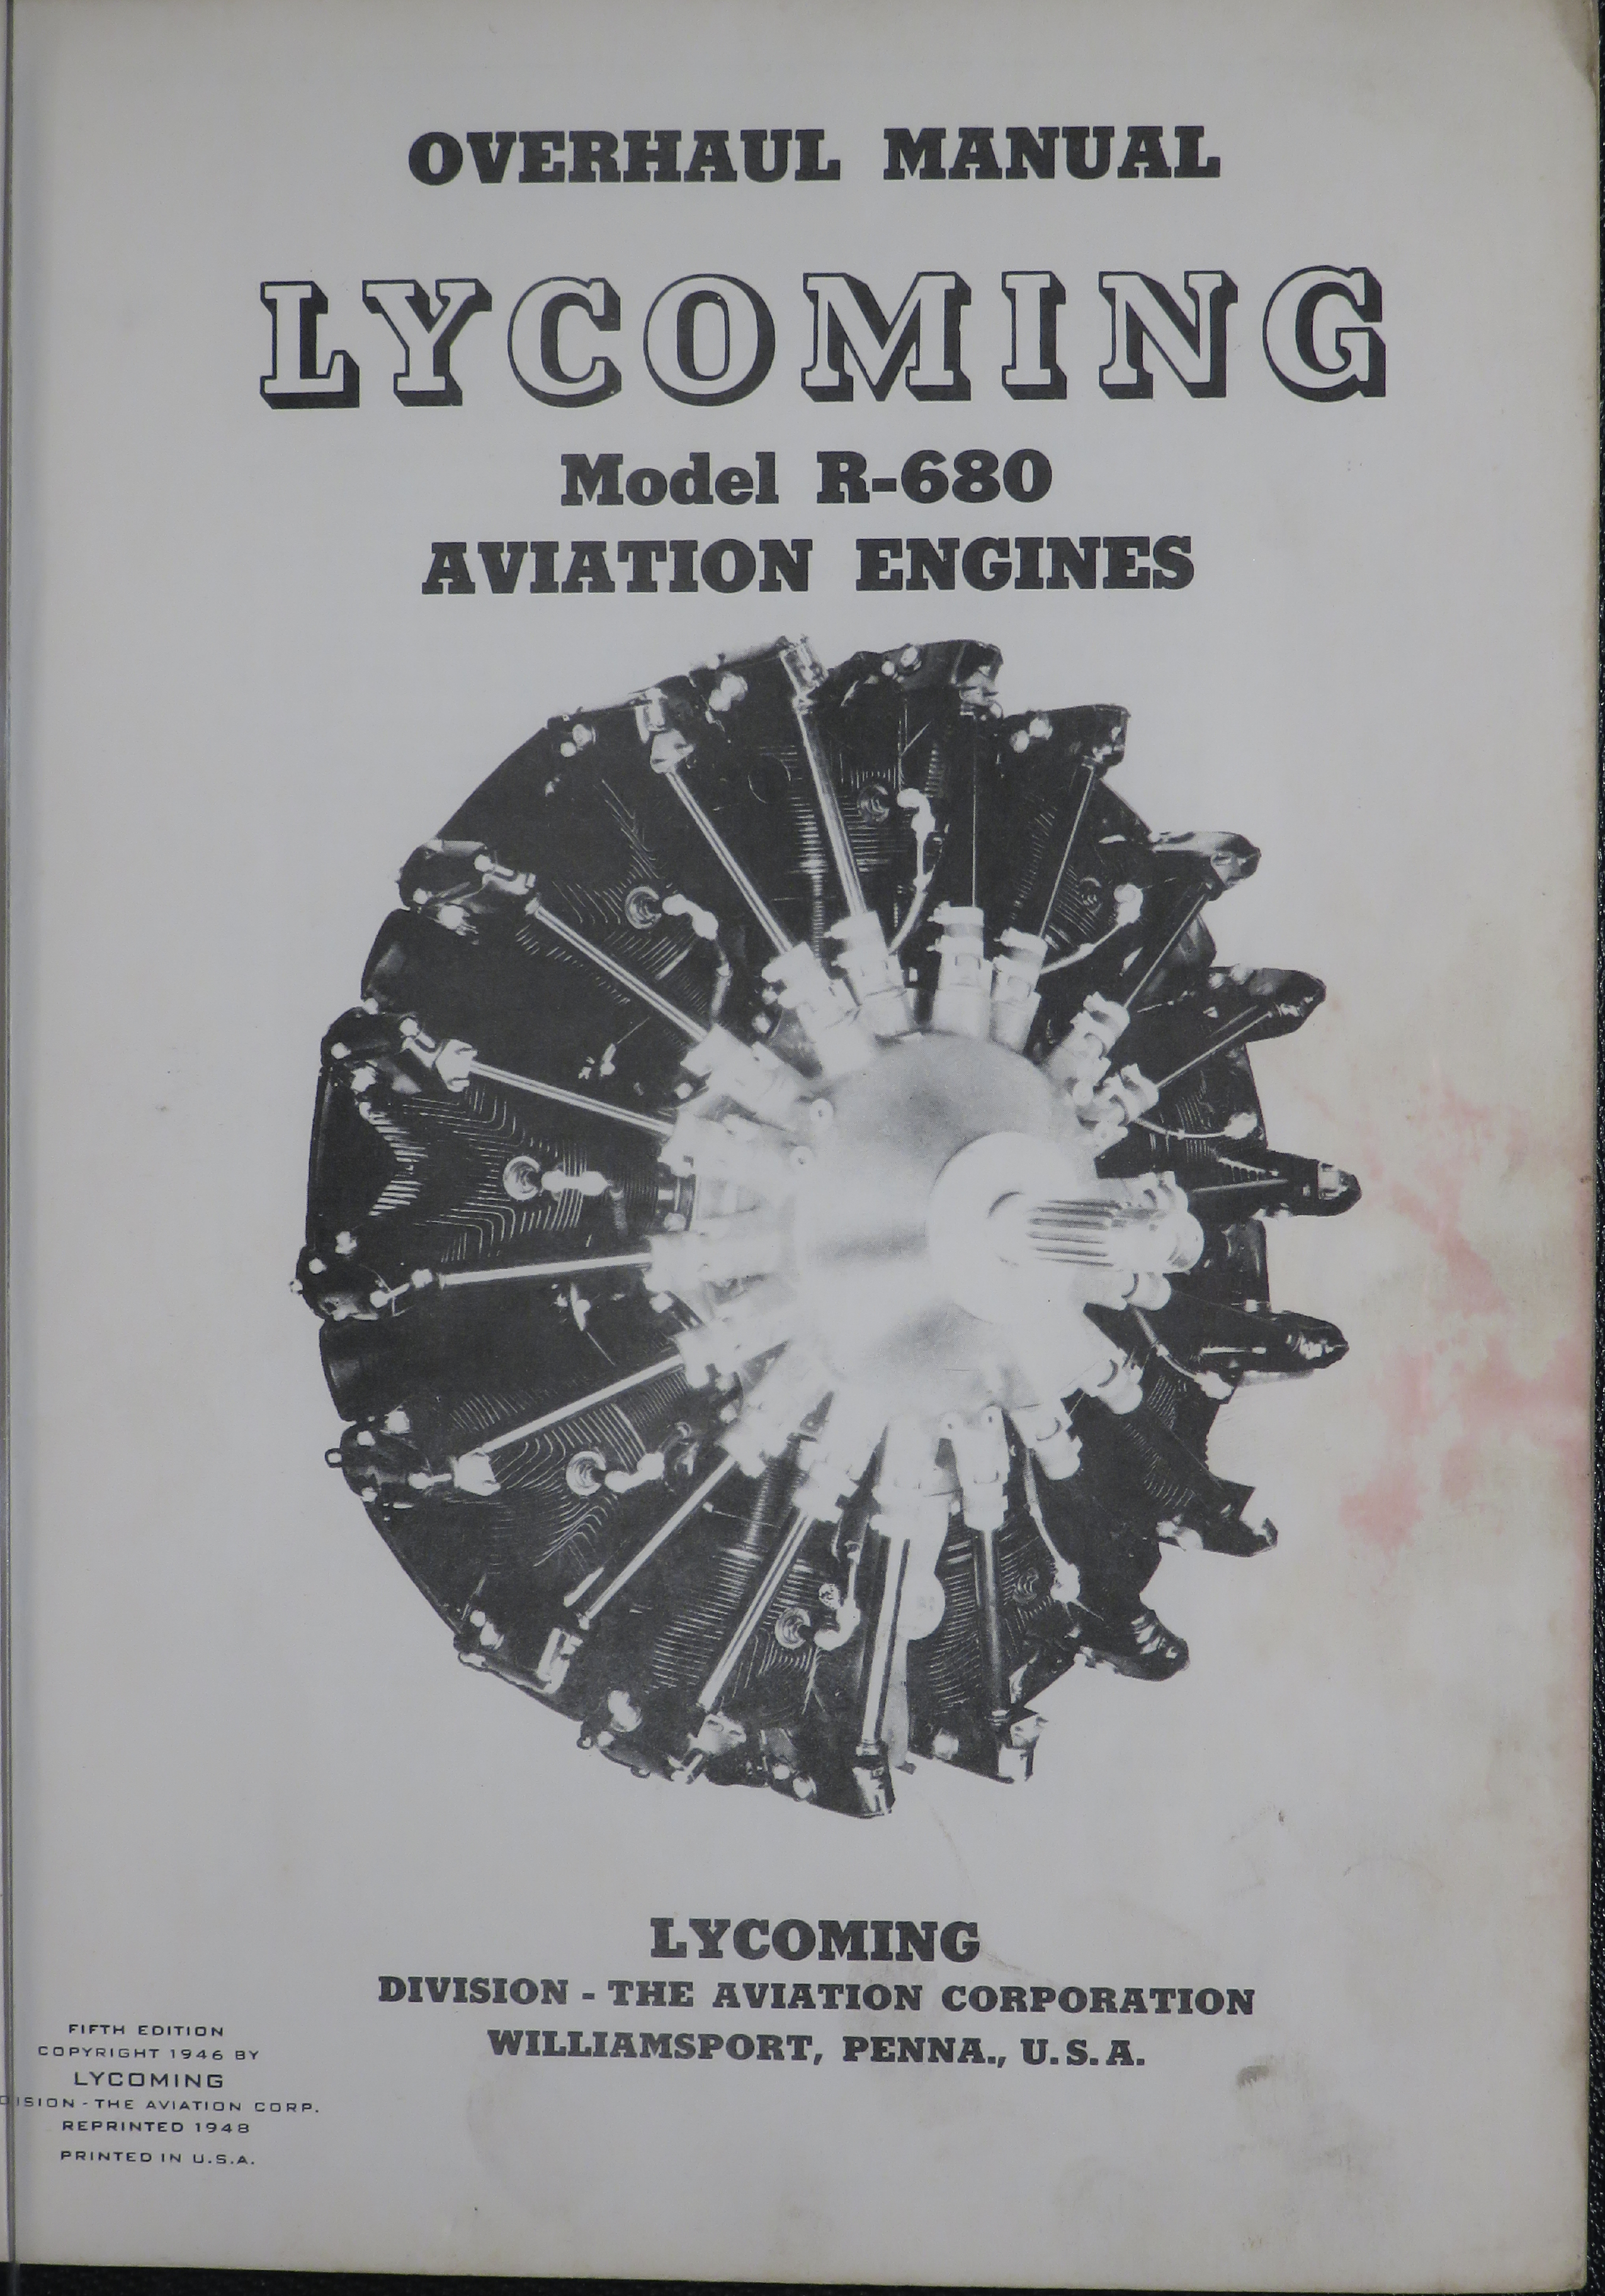 Sample page 5 from AirCorps Library document: Overhaul Manual for R-680 Series Lycoming Engines